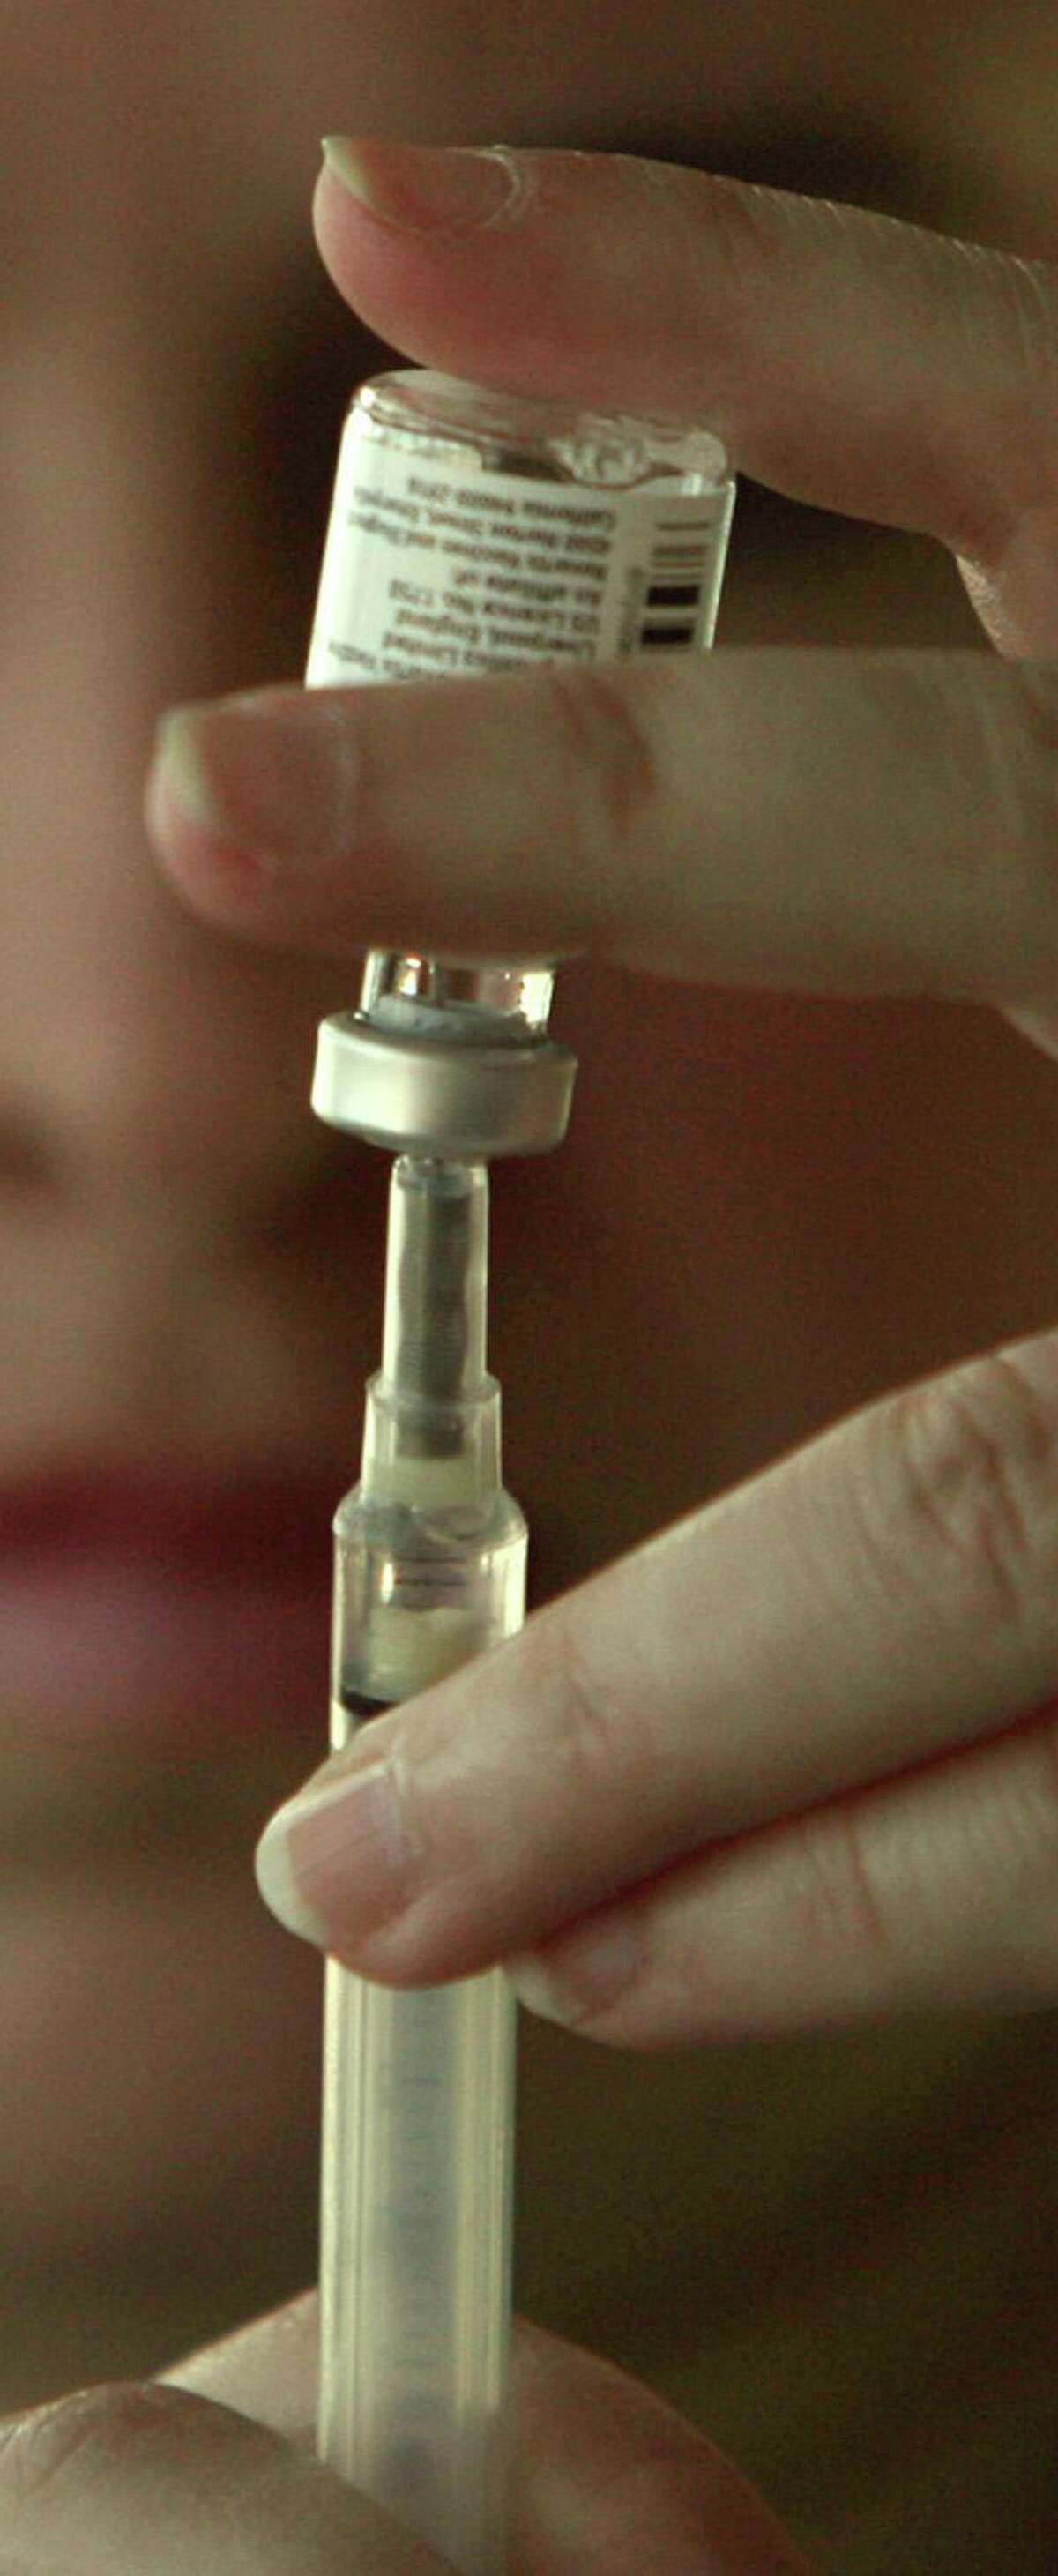 Experts say flu shots work and there are different types: During the 2018-19 U.S. flu season, the vaccine averted more than four million illnesses, two million doctor visits and about 58,000 hospitalizations and 3,500 deaths, according to the CDC. Dr. Ruth Berggren, an infectious disease specialist with the Long School of Medicine at UT Health San Antonio, said there are a few things the community should know before heading out to get a flu shot:  1). Children between six months and 8 years old who have never had a flu shot, or have only had one flu shot in their life, will likely have to get two doses of the flu vaccine this year, Berggren said. The doses will be given four weeks apart, which is why local doctors want children in that age group to get their vaccine as soon as possible.   2). If you're over the age of 65, there are two new, improved flu vaccines that are being offered for your age group, Berggren said. The high-dose vaccines contain four times as much flu virus antigen — the part of the vaccine that stimulates the immune system — as other standard flu vaccines. This can give older people a higher immune system response against the flu. 3). For those with an egg allergy, there are two vaccines licensed for use that are manufactured without the use of eggs and are considered egg-free.  4). For people who dislike needles, FluMist is a vaccine sprayed into the nose to help protect against the flu. It is a one-time dose and should not be administered to children with asthma, pregnant woman and people who are immunocompromised. 